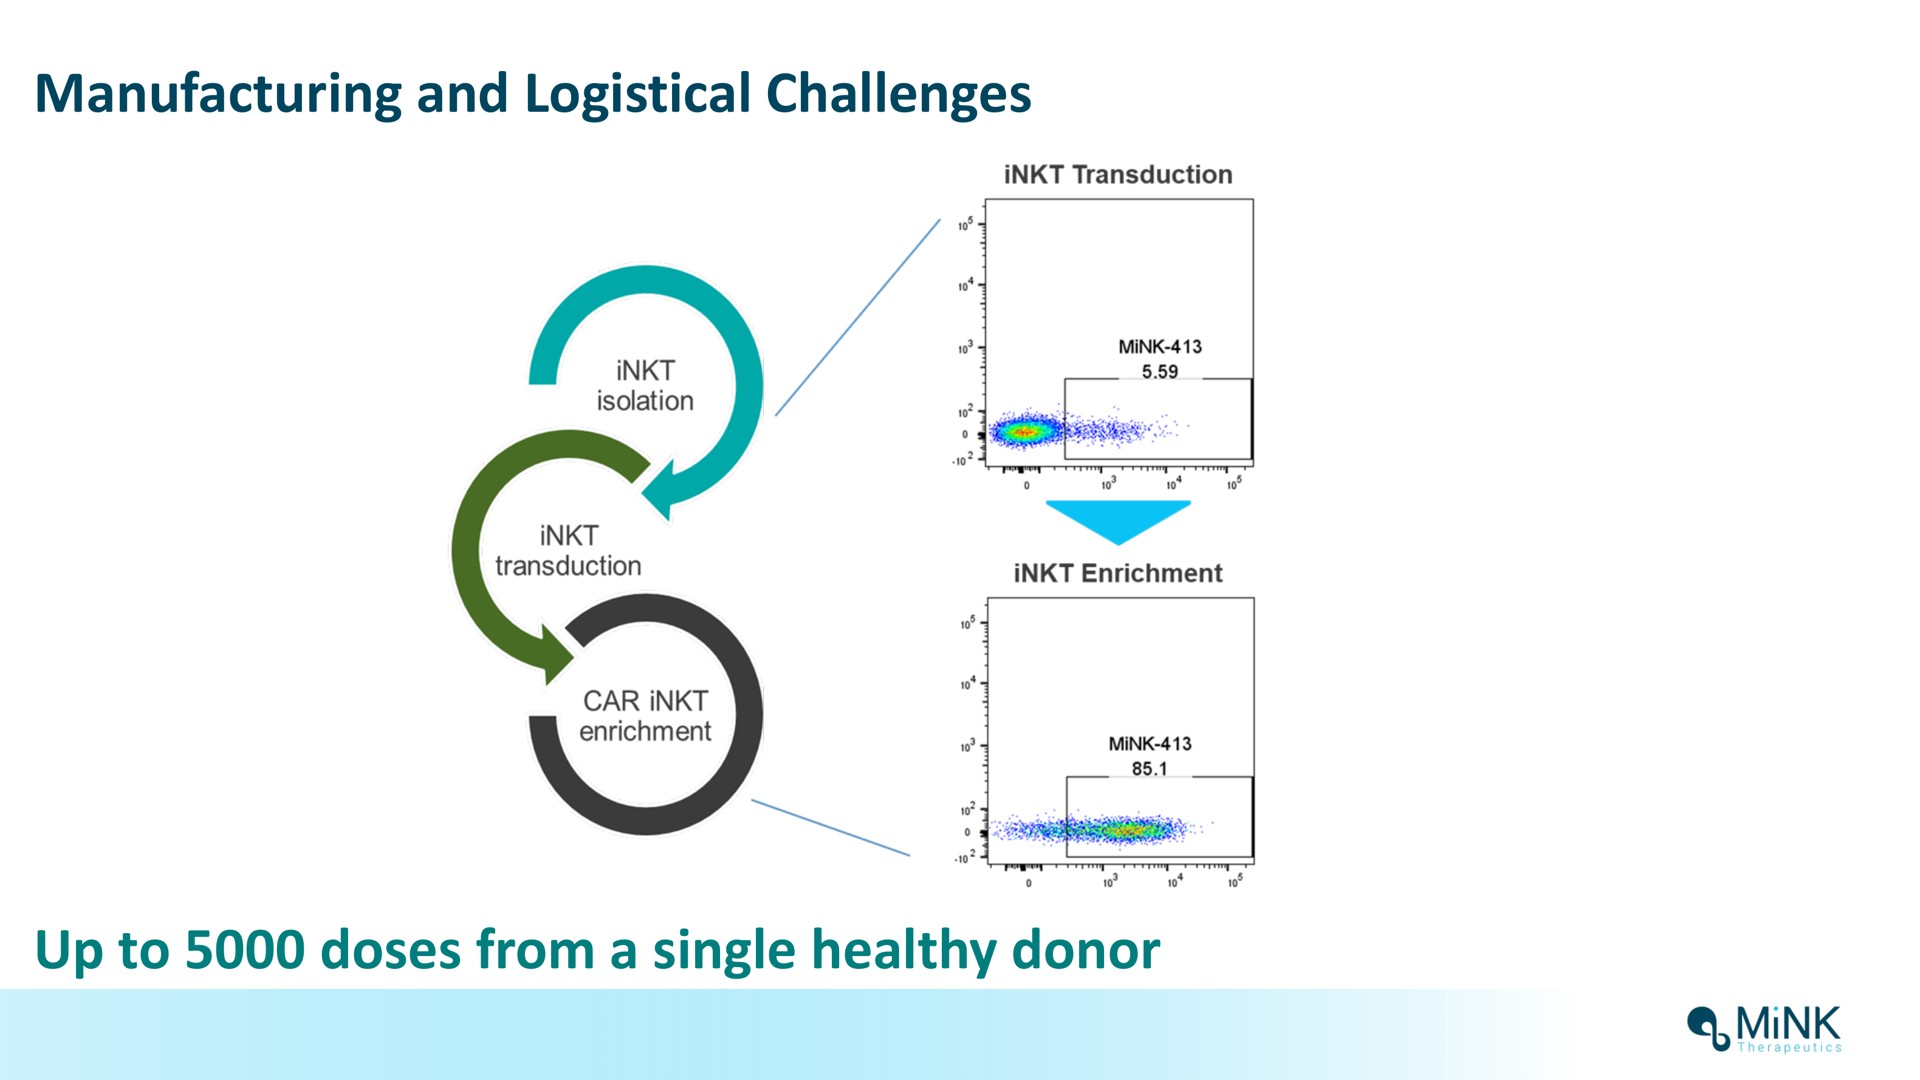 manufacturing and logistical challenges up to doses from a single healthy donor mink | Mink Therapeutics